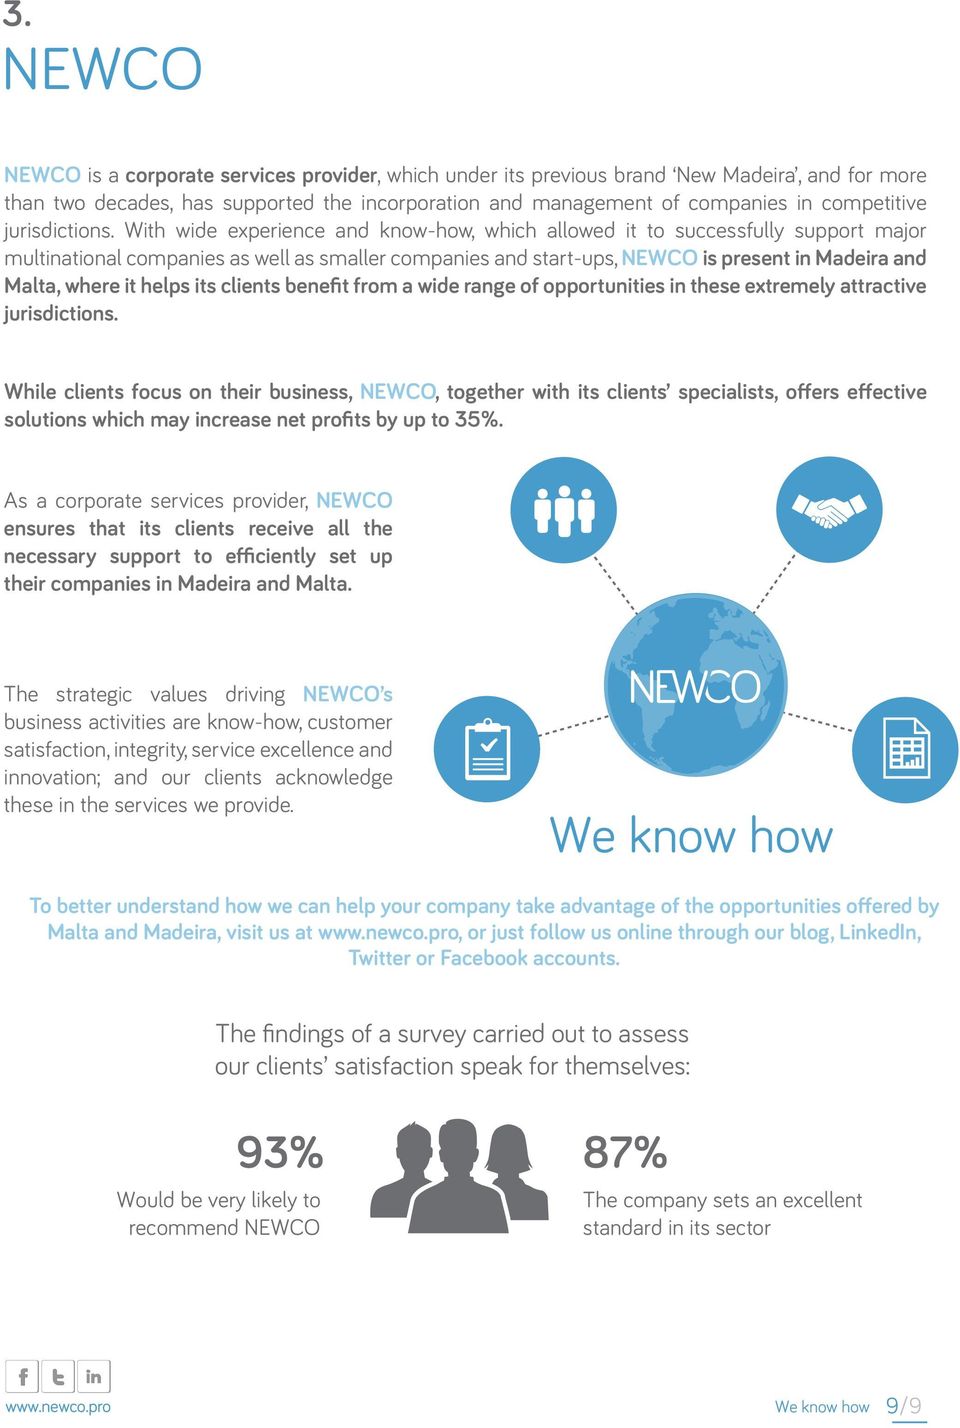 With wide experience and know-how, which allowed it to successfully support major multinational companies as well as smaller companies and start-ups, NEWCO is present in Madeira and Malta, where it